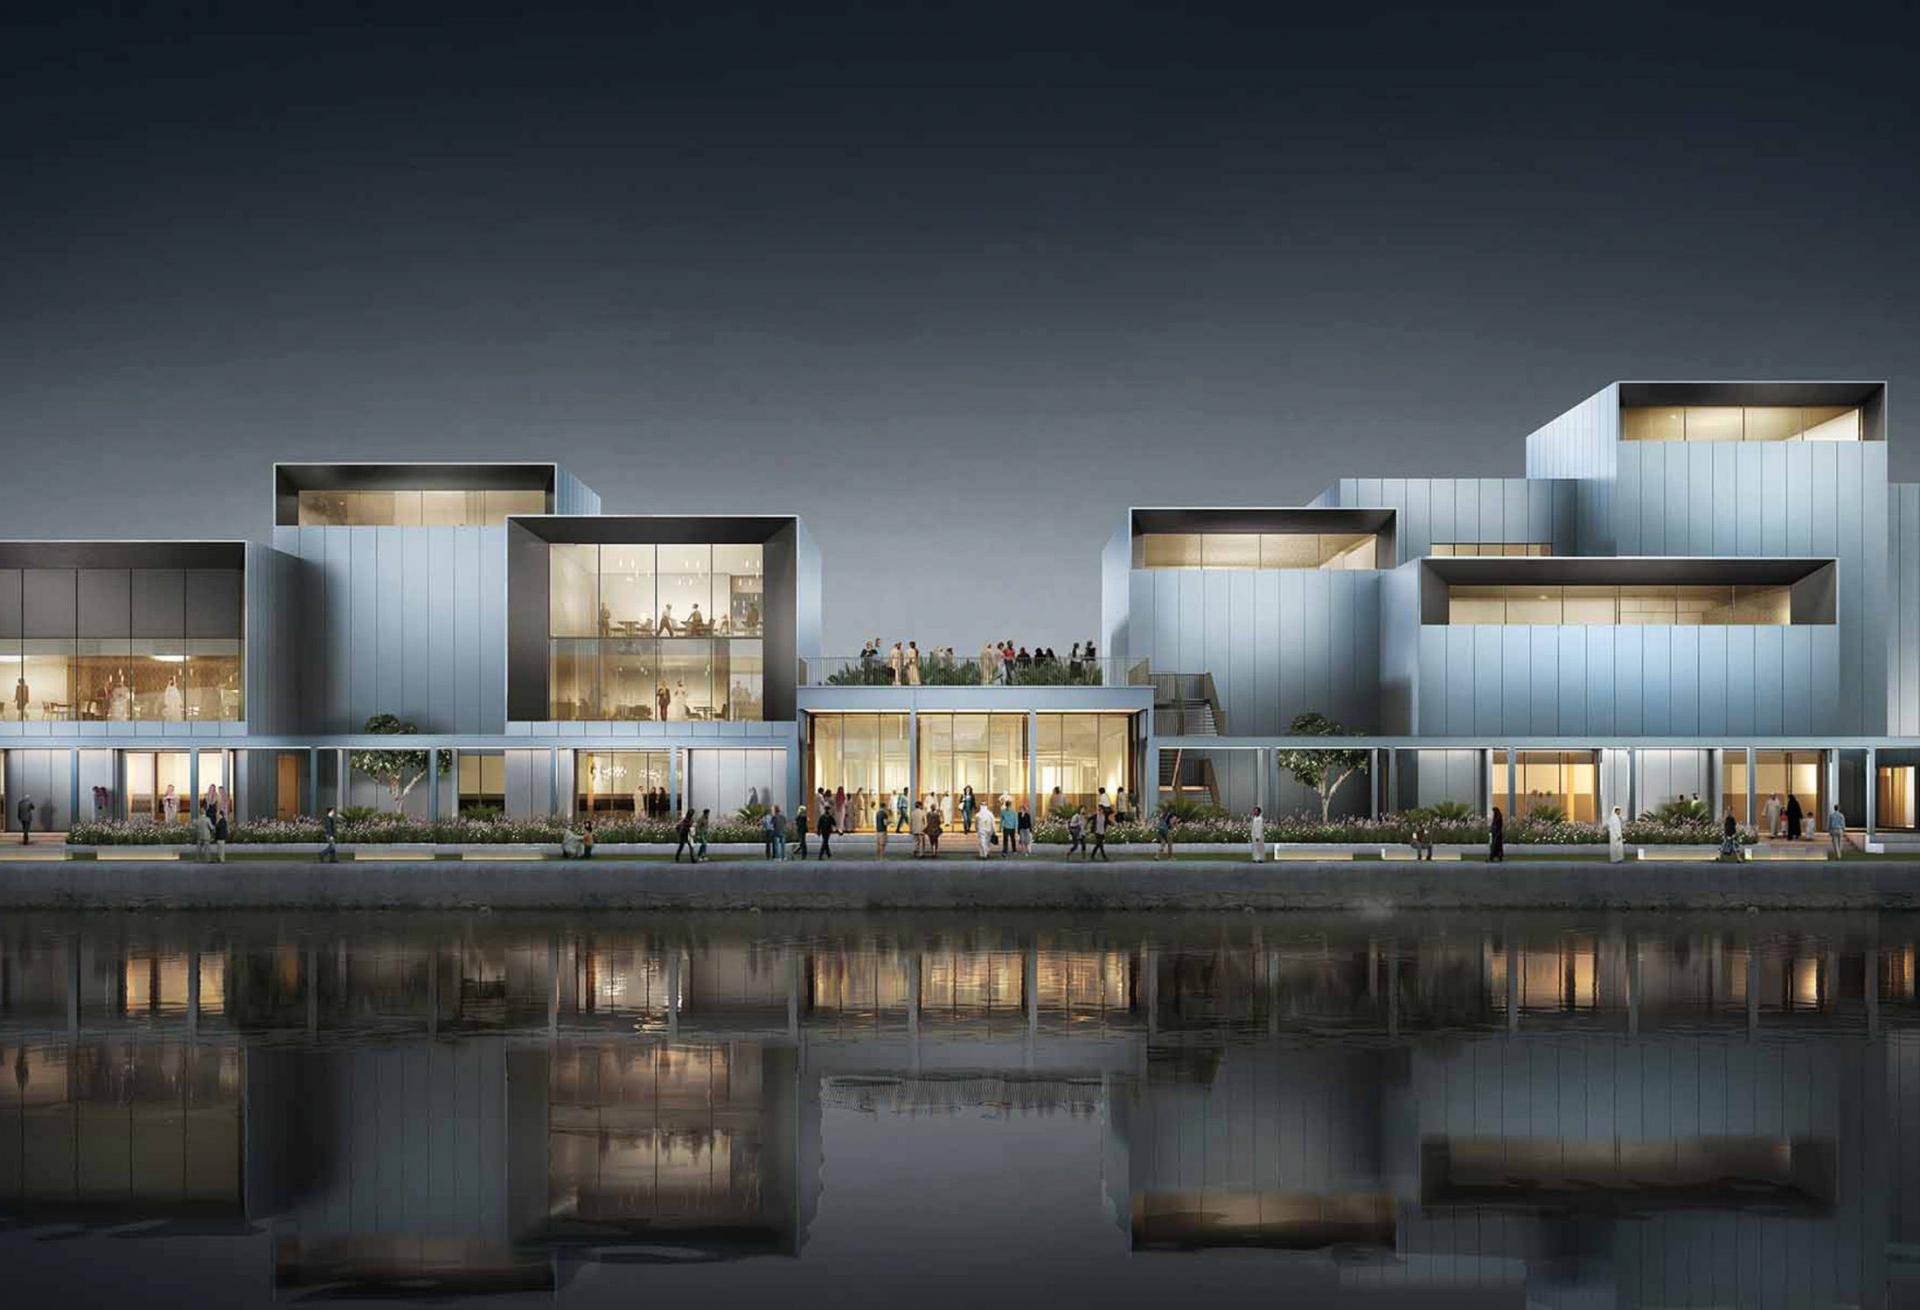 A computer-generated model of the Jameel Arts Centre in Dubai